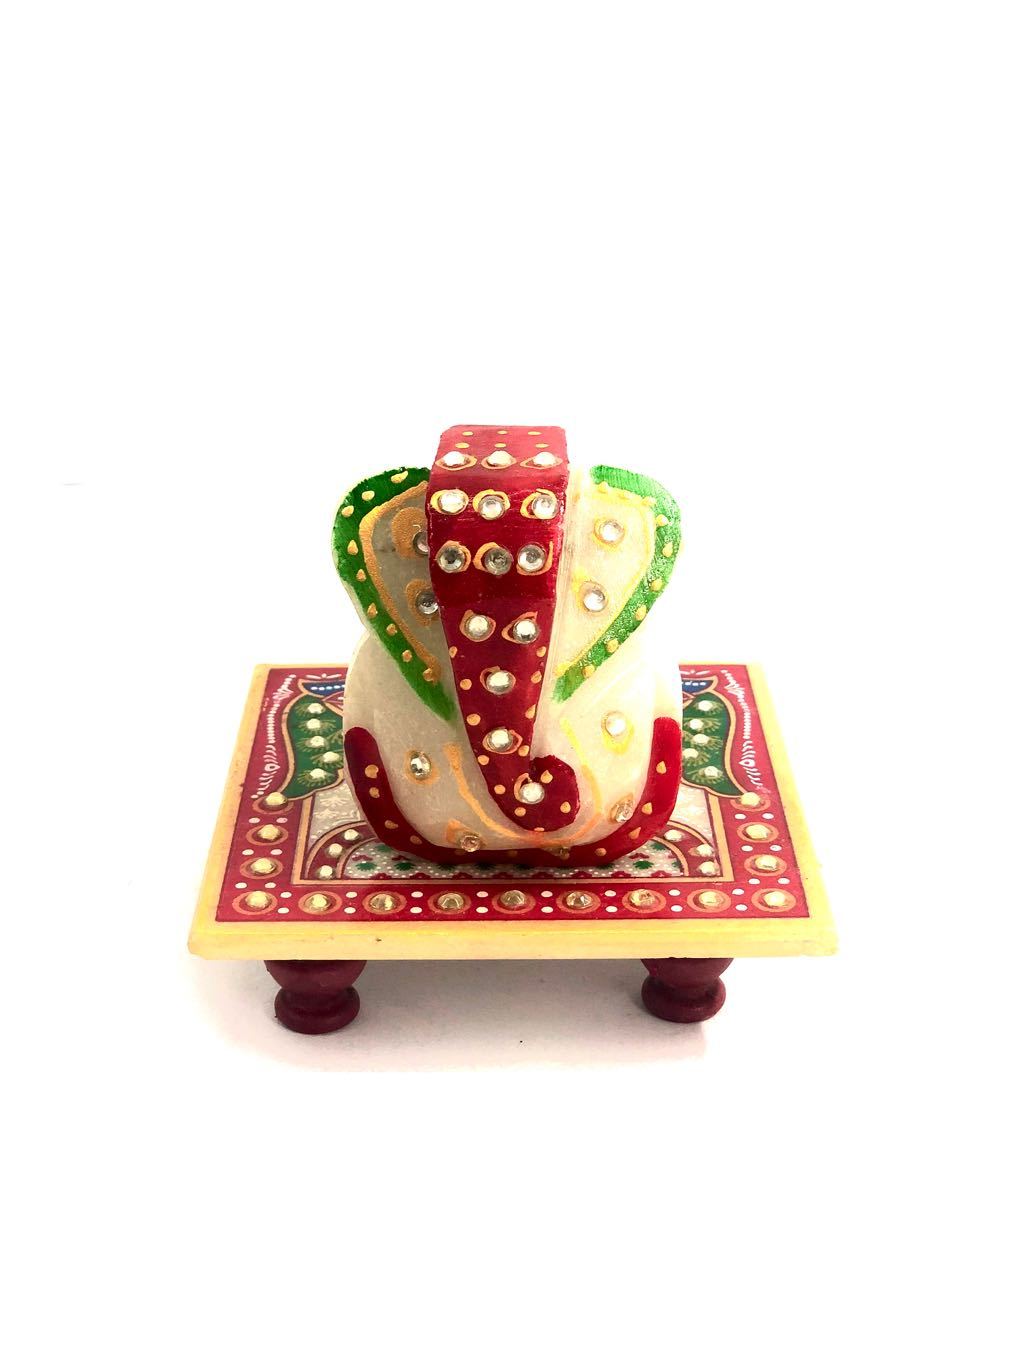 Designer Marble Ganesh With Bajot Best For Gifting Religious Tamrapatra